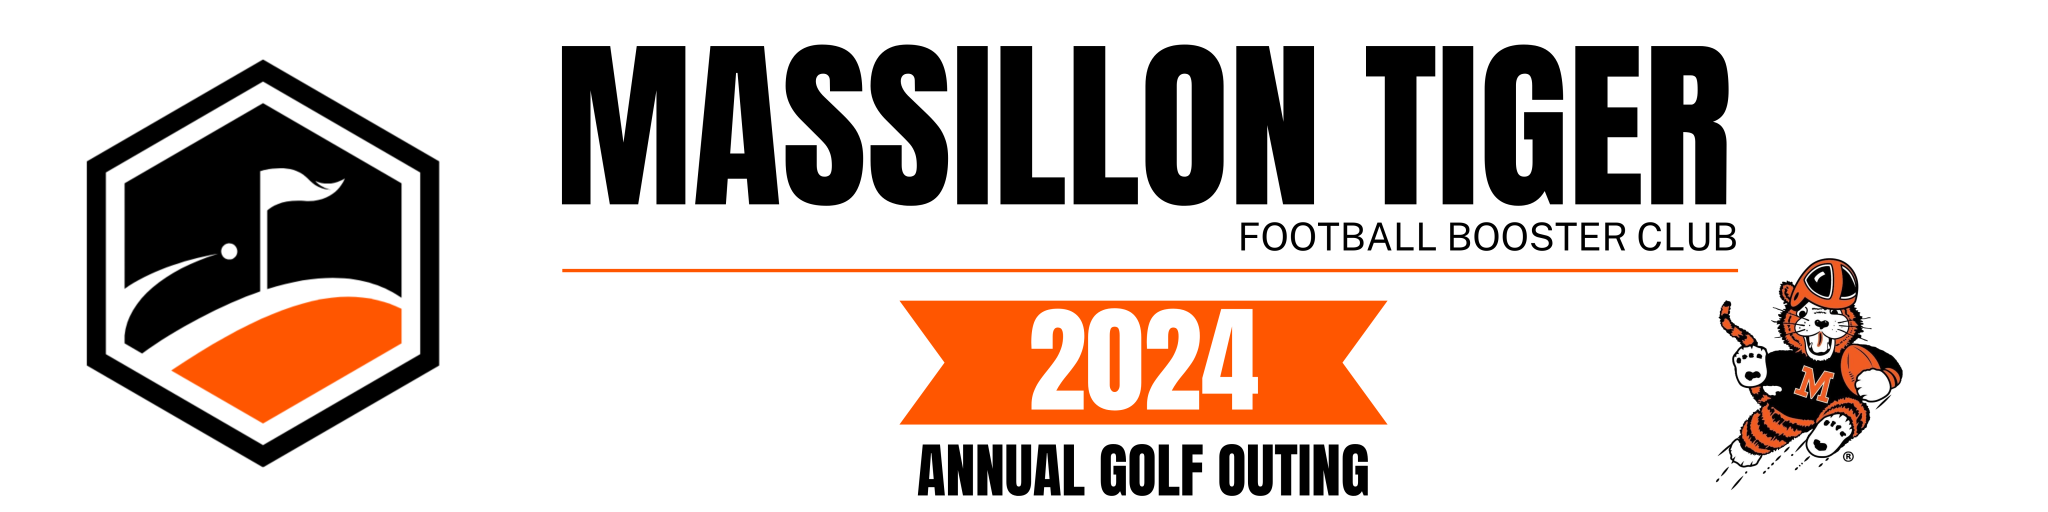 Fundraiser (Golf Outing) - Massillon Tiger Football Booster Club